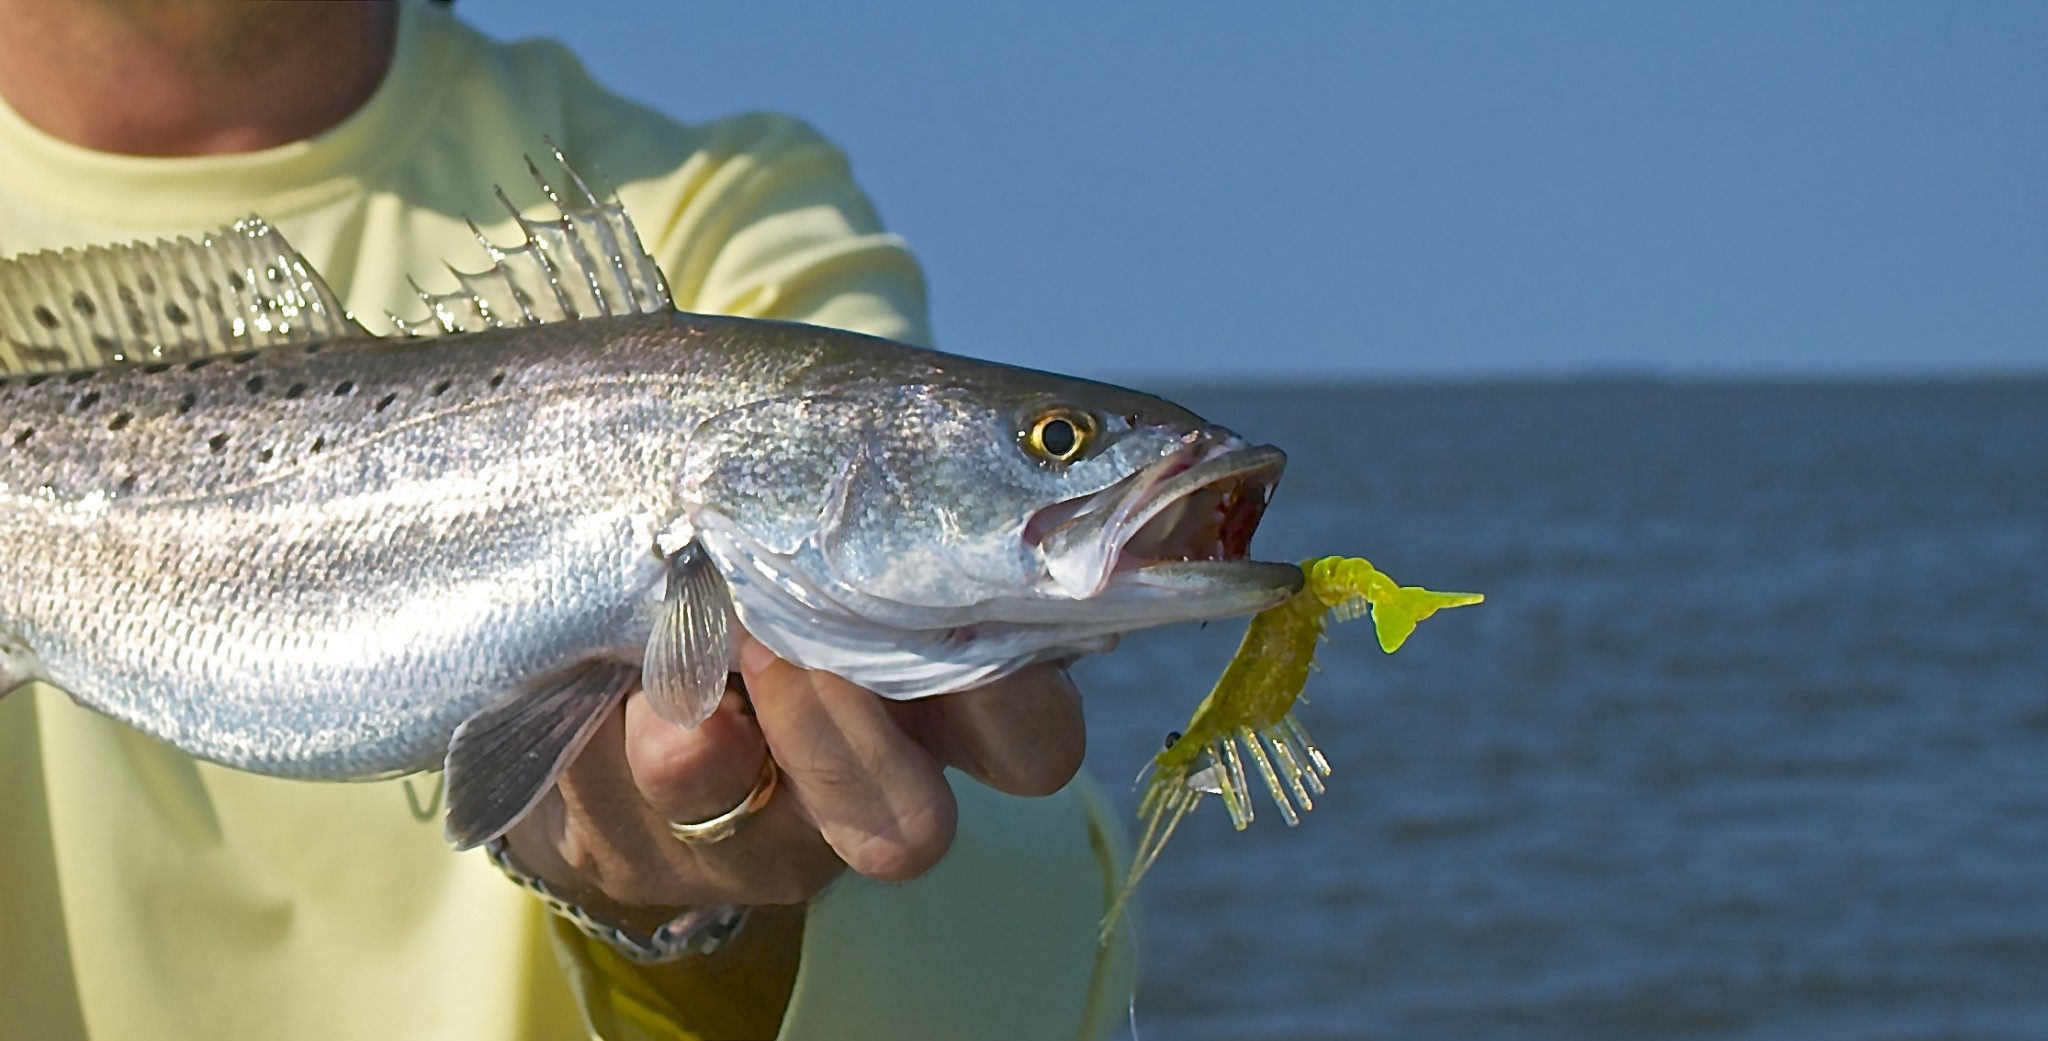 Speckled Sea Trout Fishing - Fly and Light Tackle Fishing for Sea Trout